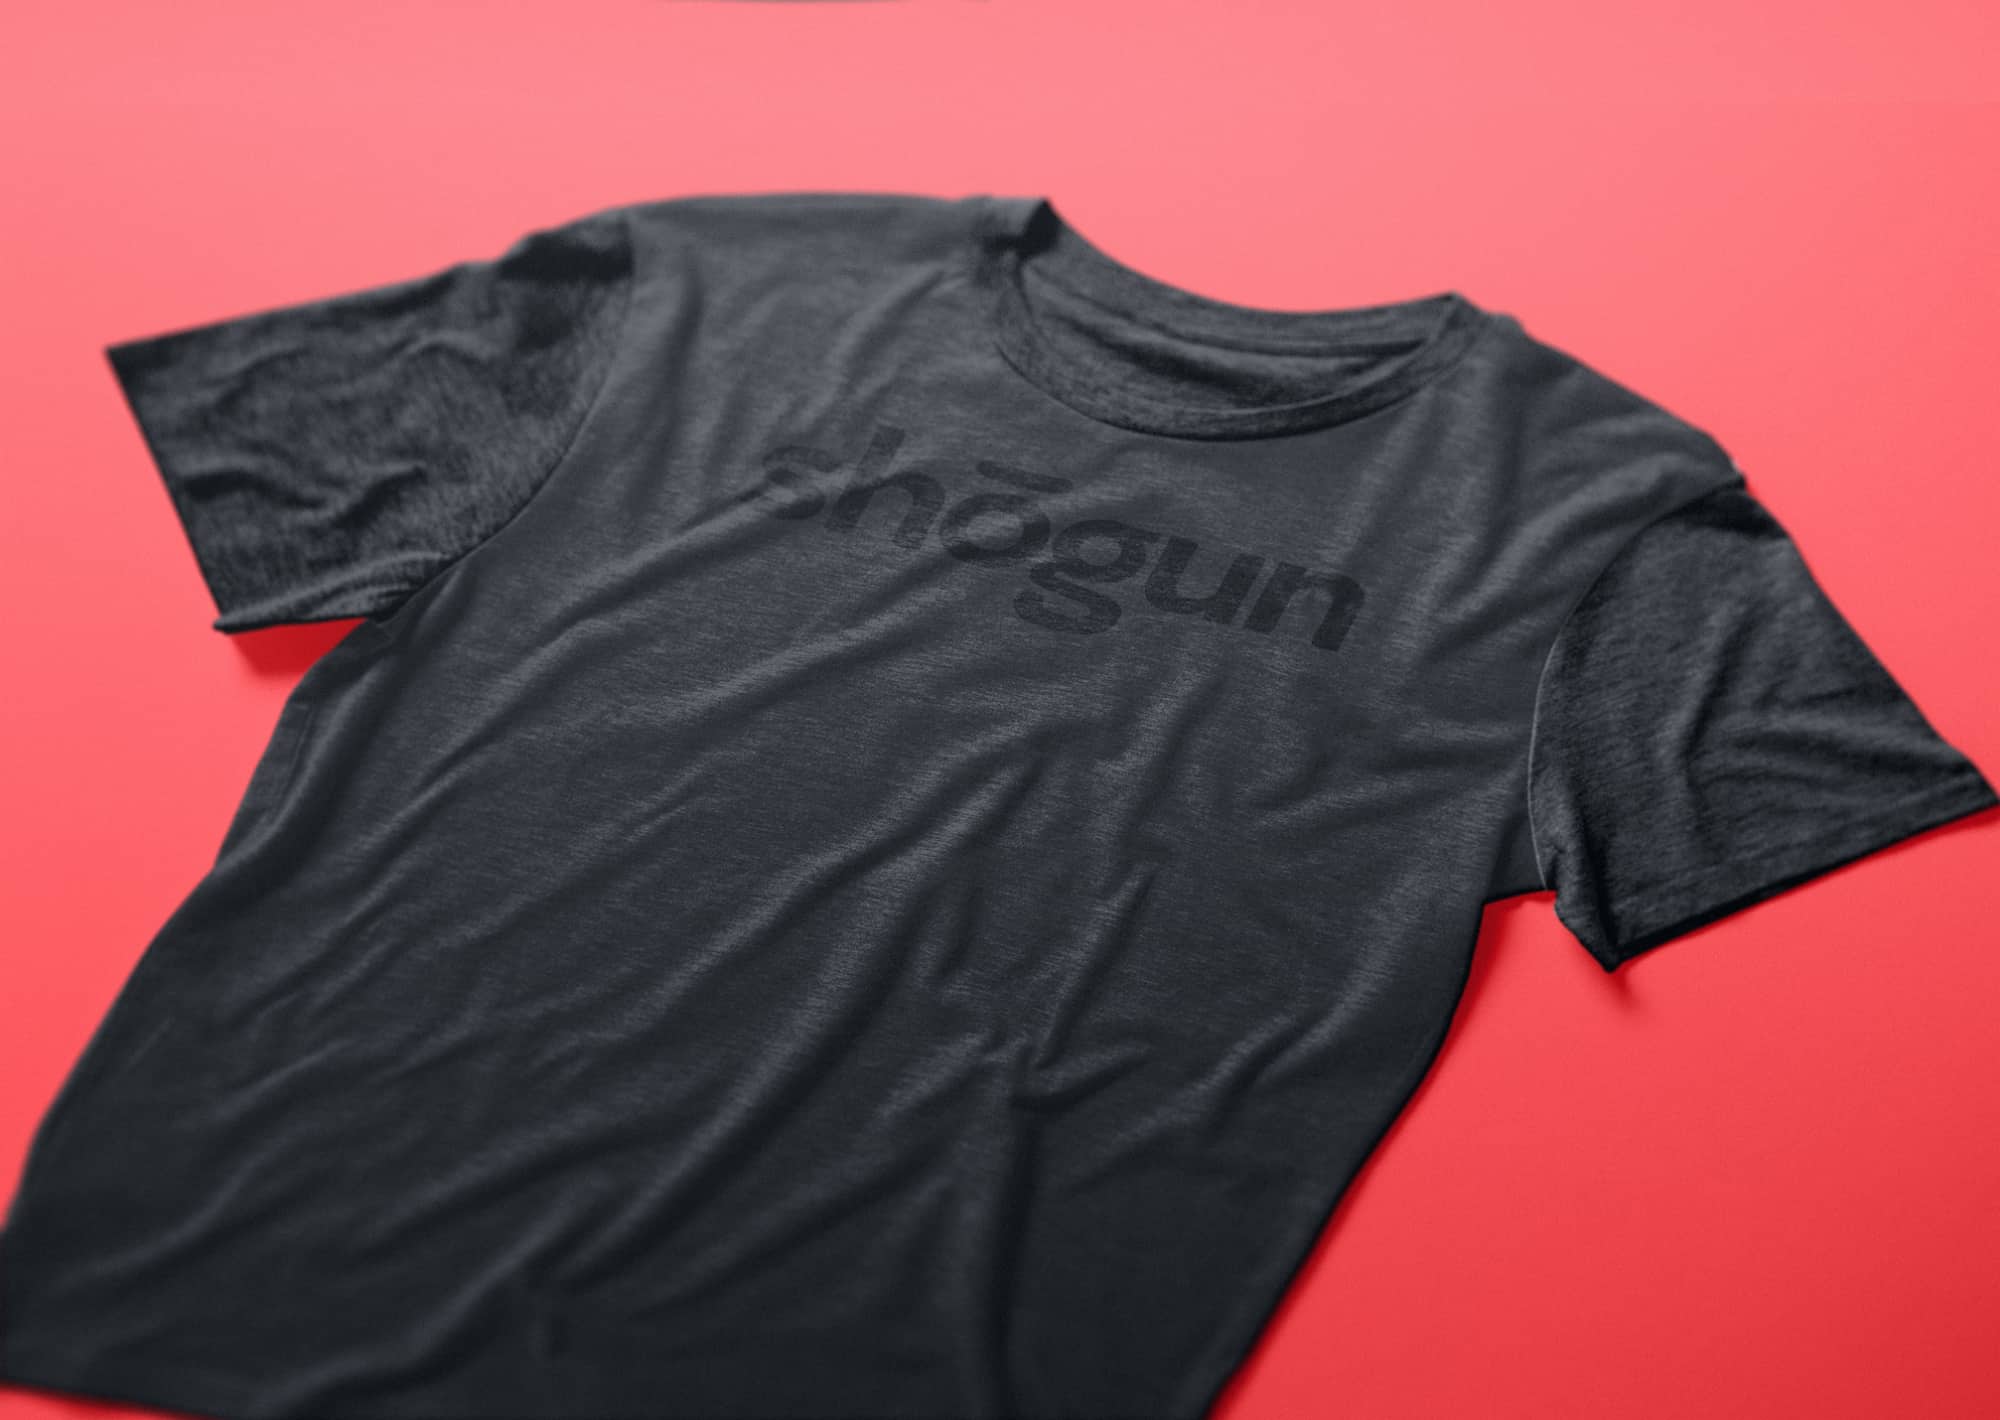 A black t-shirt with a black Shogun logo on it. The t-shirt is on a red surface.